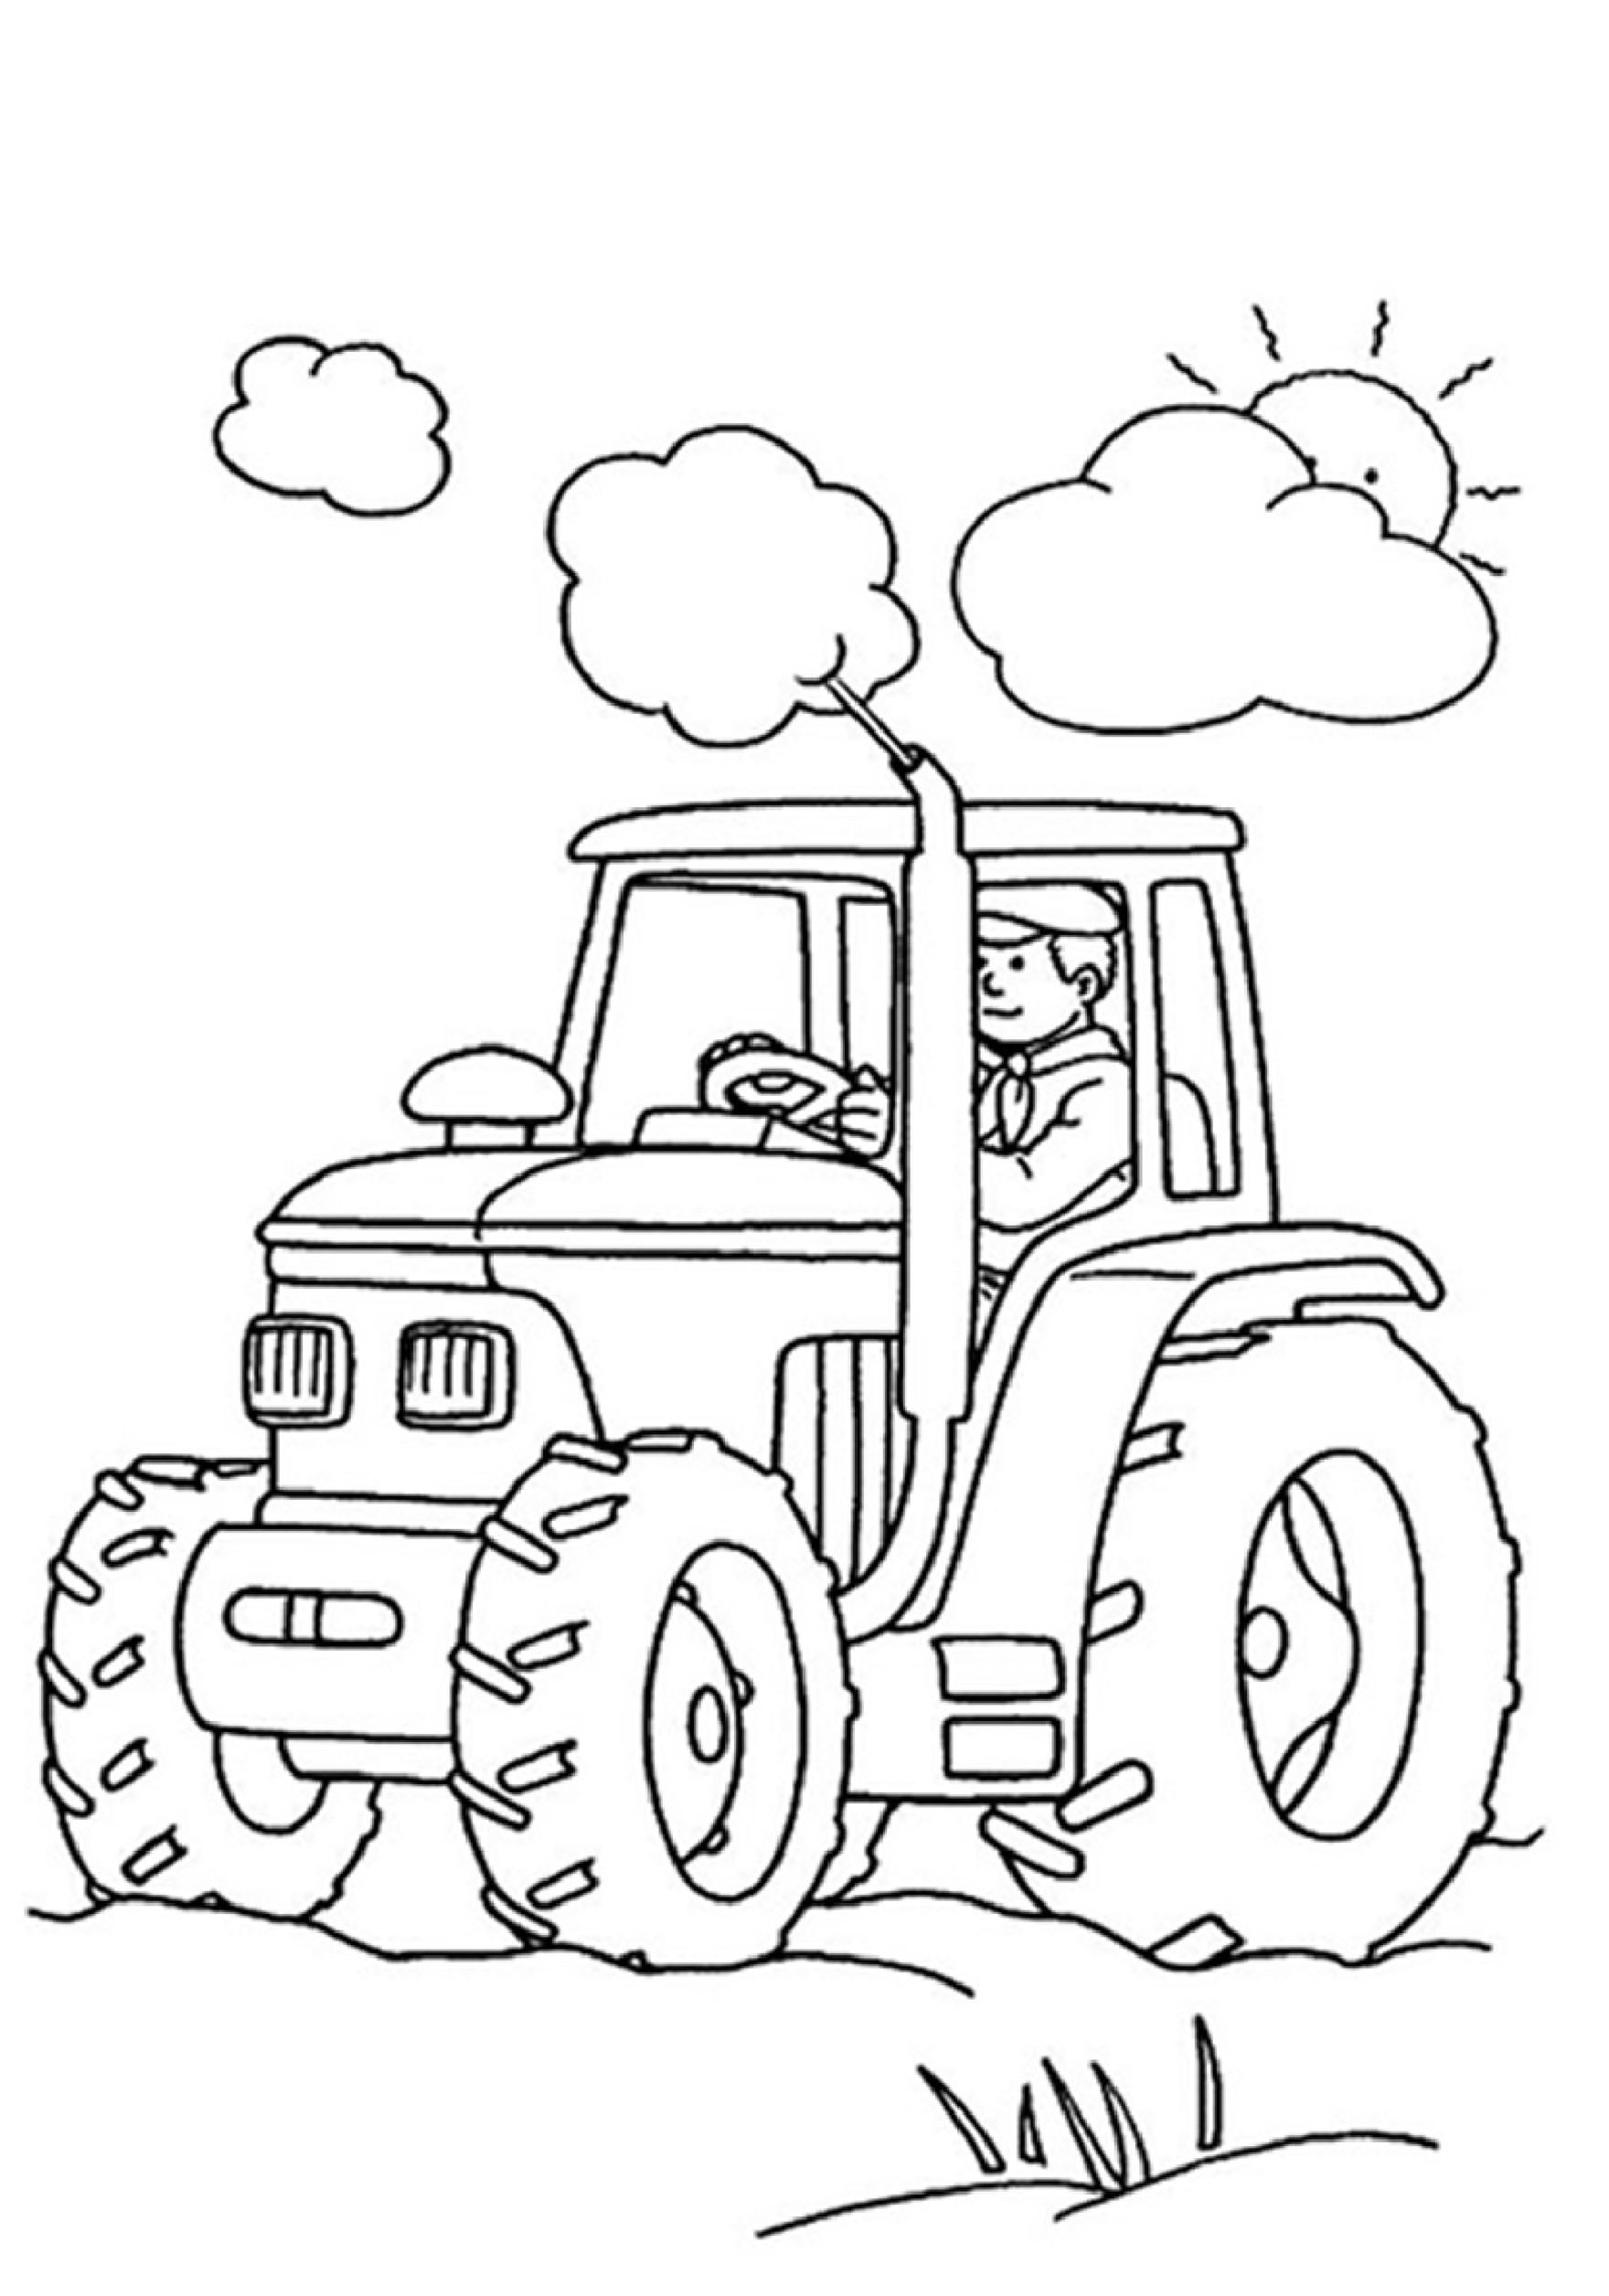 Free Printable Coloring Pages For Boys
 Coloring pages for boys